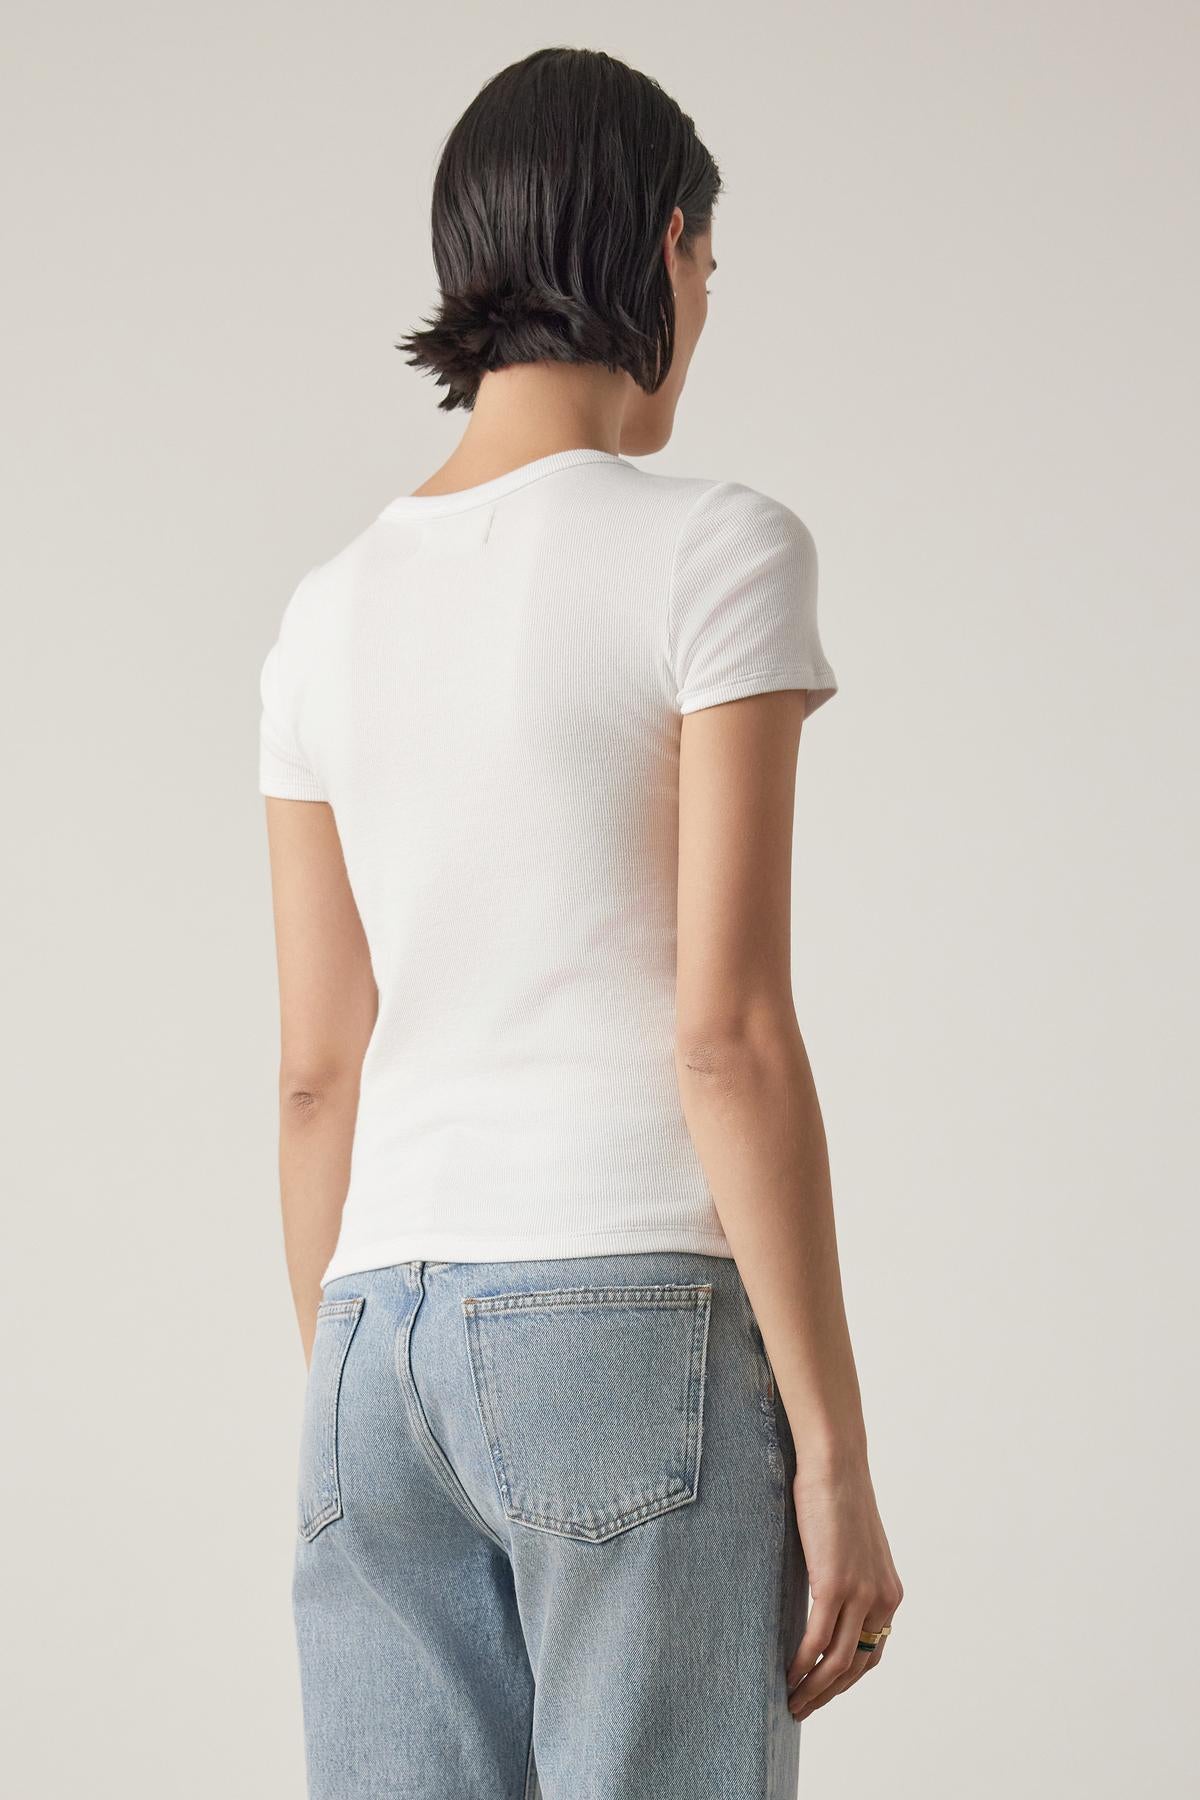 Rear view of a woman in a white BEDFORD TEE from Velvet by Jenny Graham with a crew neckline and blue jeans, focusing on the fit of the clothes.-36753616830657